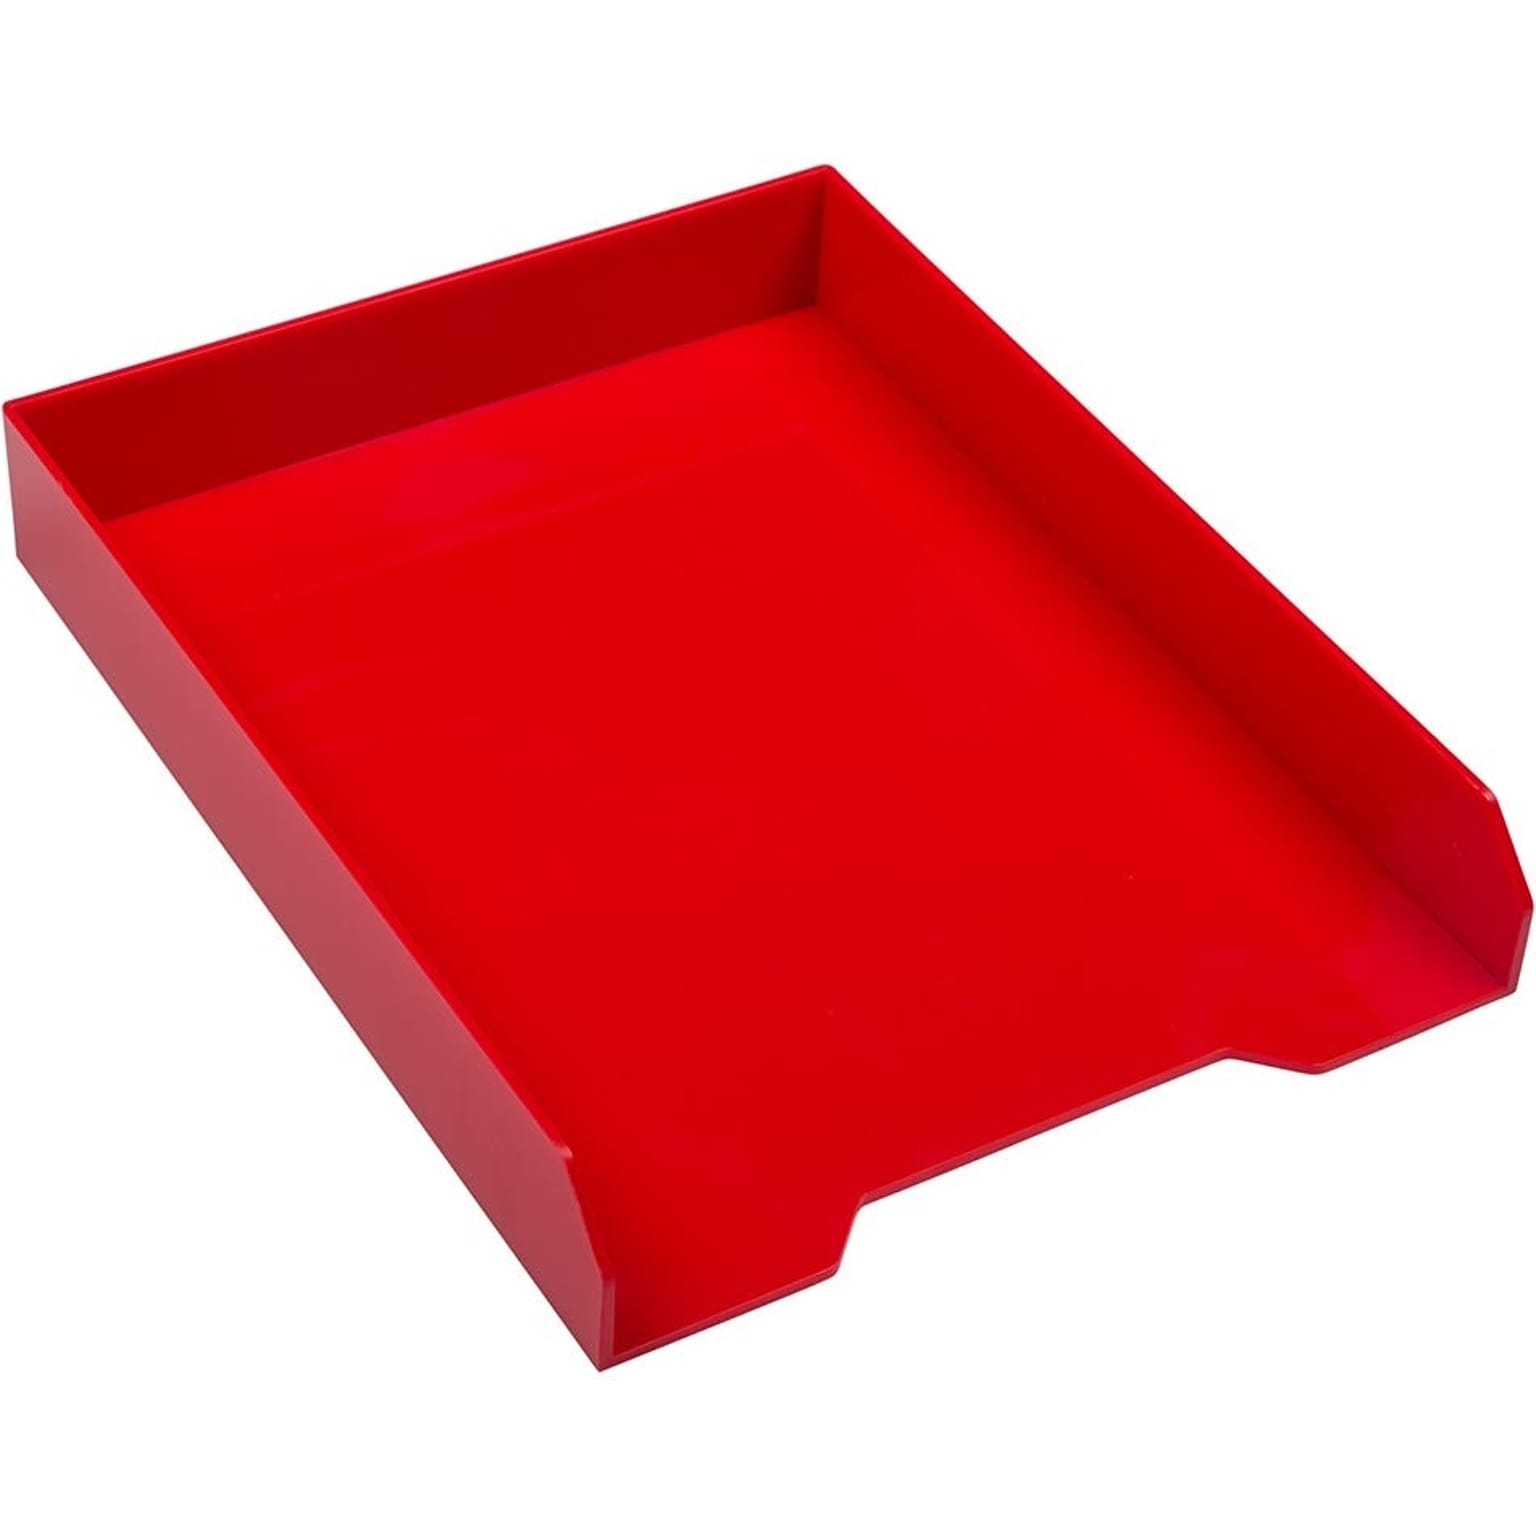 JAM PAPER Stackable Paper Trays, Red, Desktop Document, Letter, & File Organizer Tray, Sold Individually (344res)